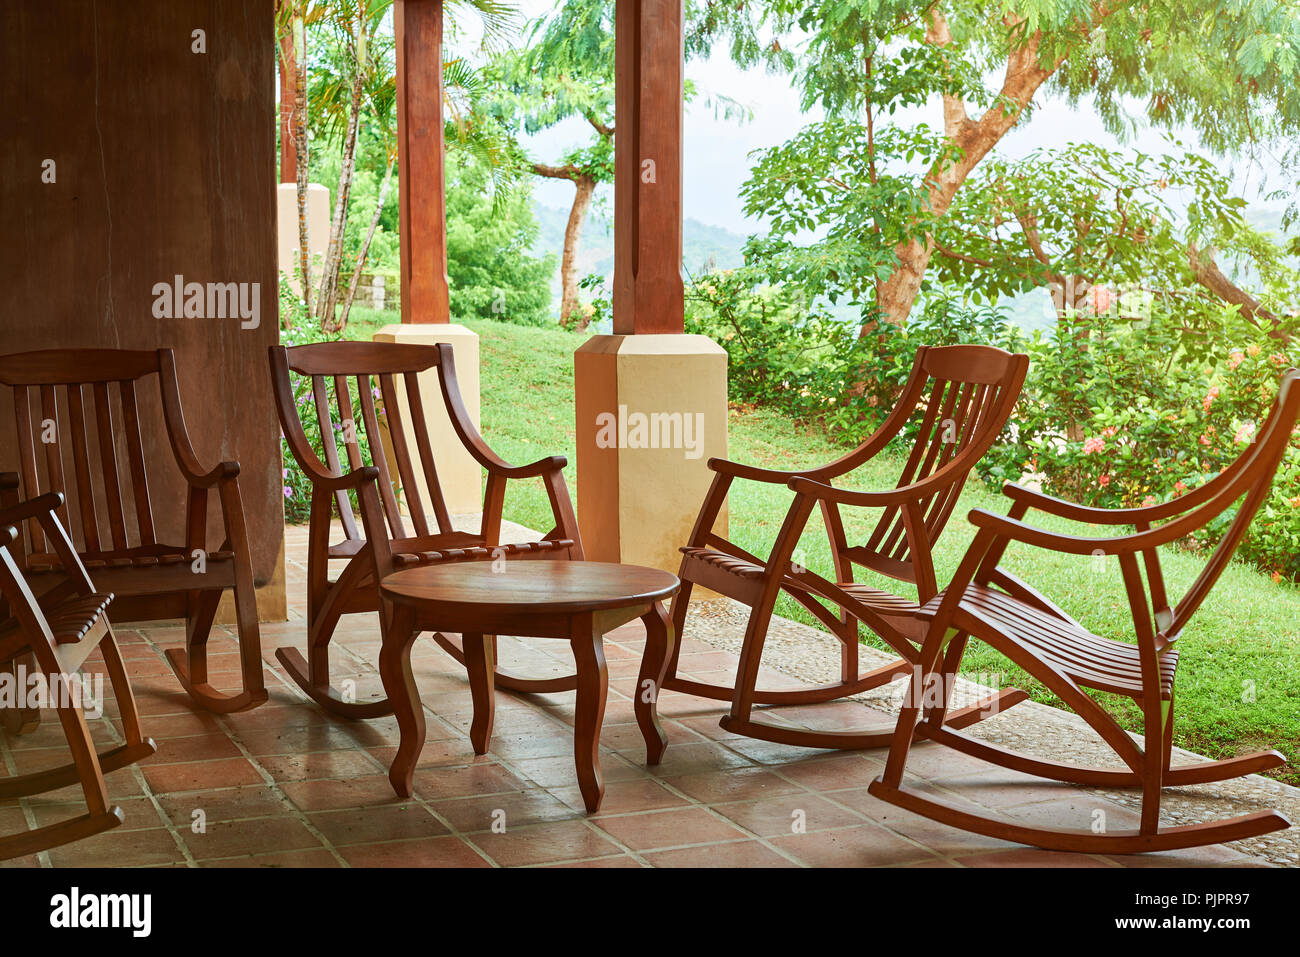 Patio with wooden chairs and table on summer sunny background Stock Photo